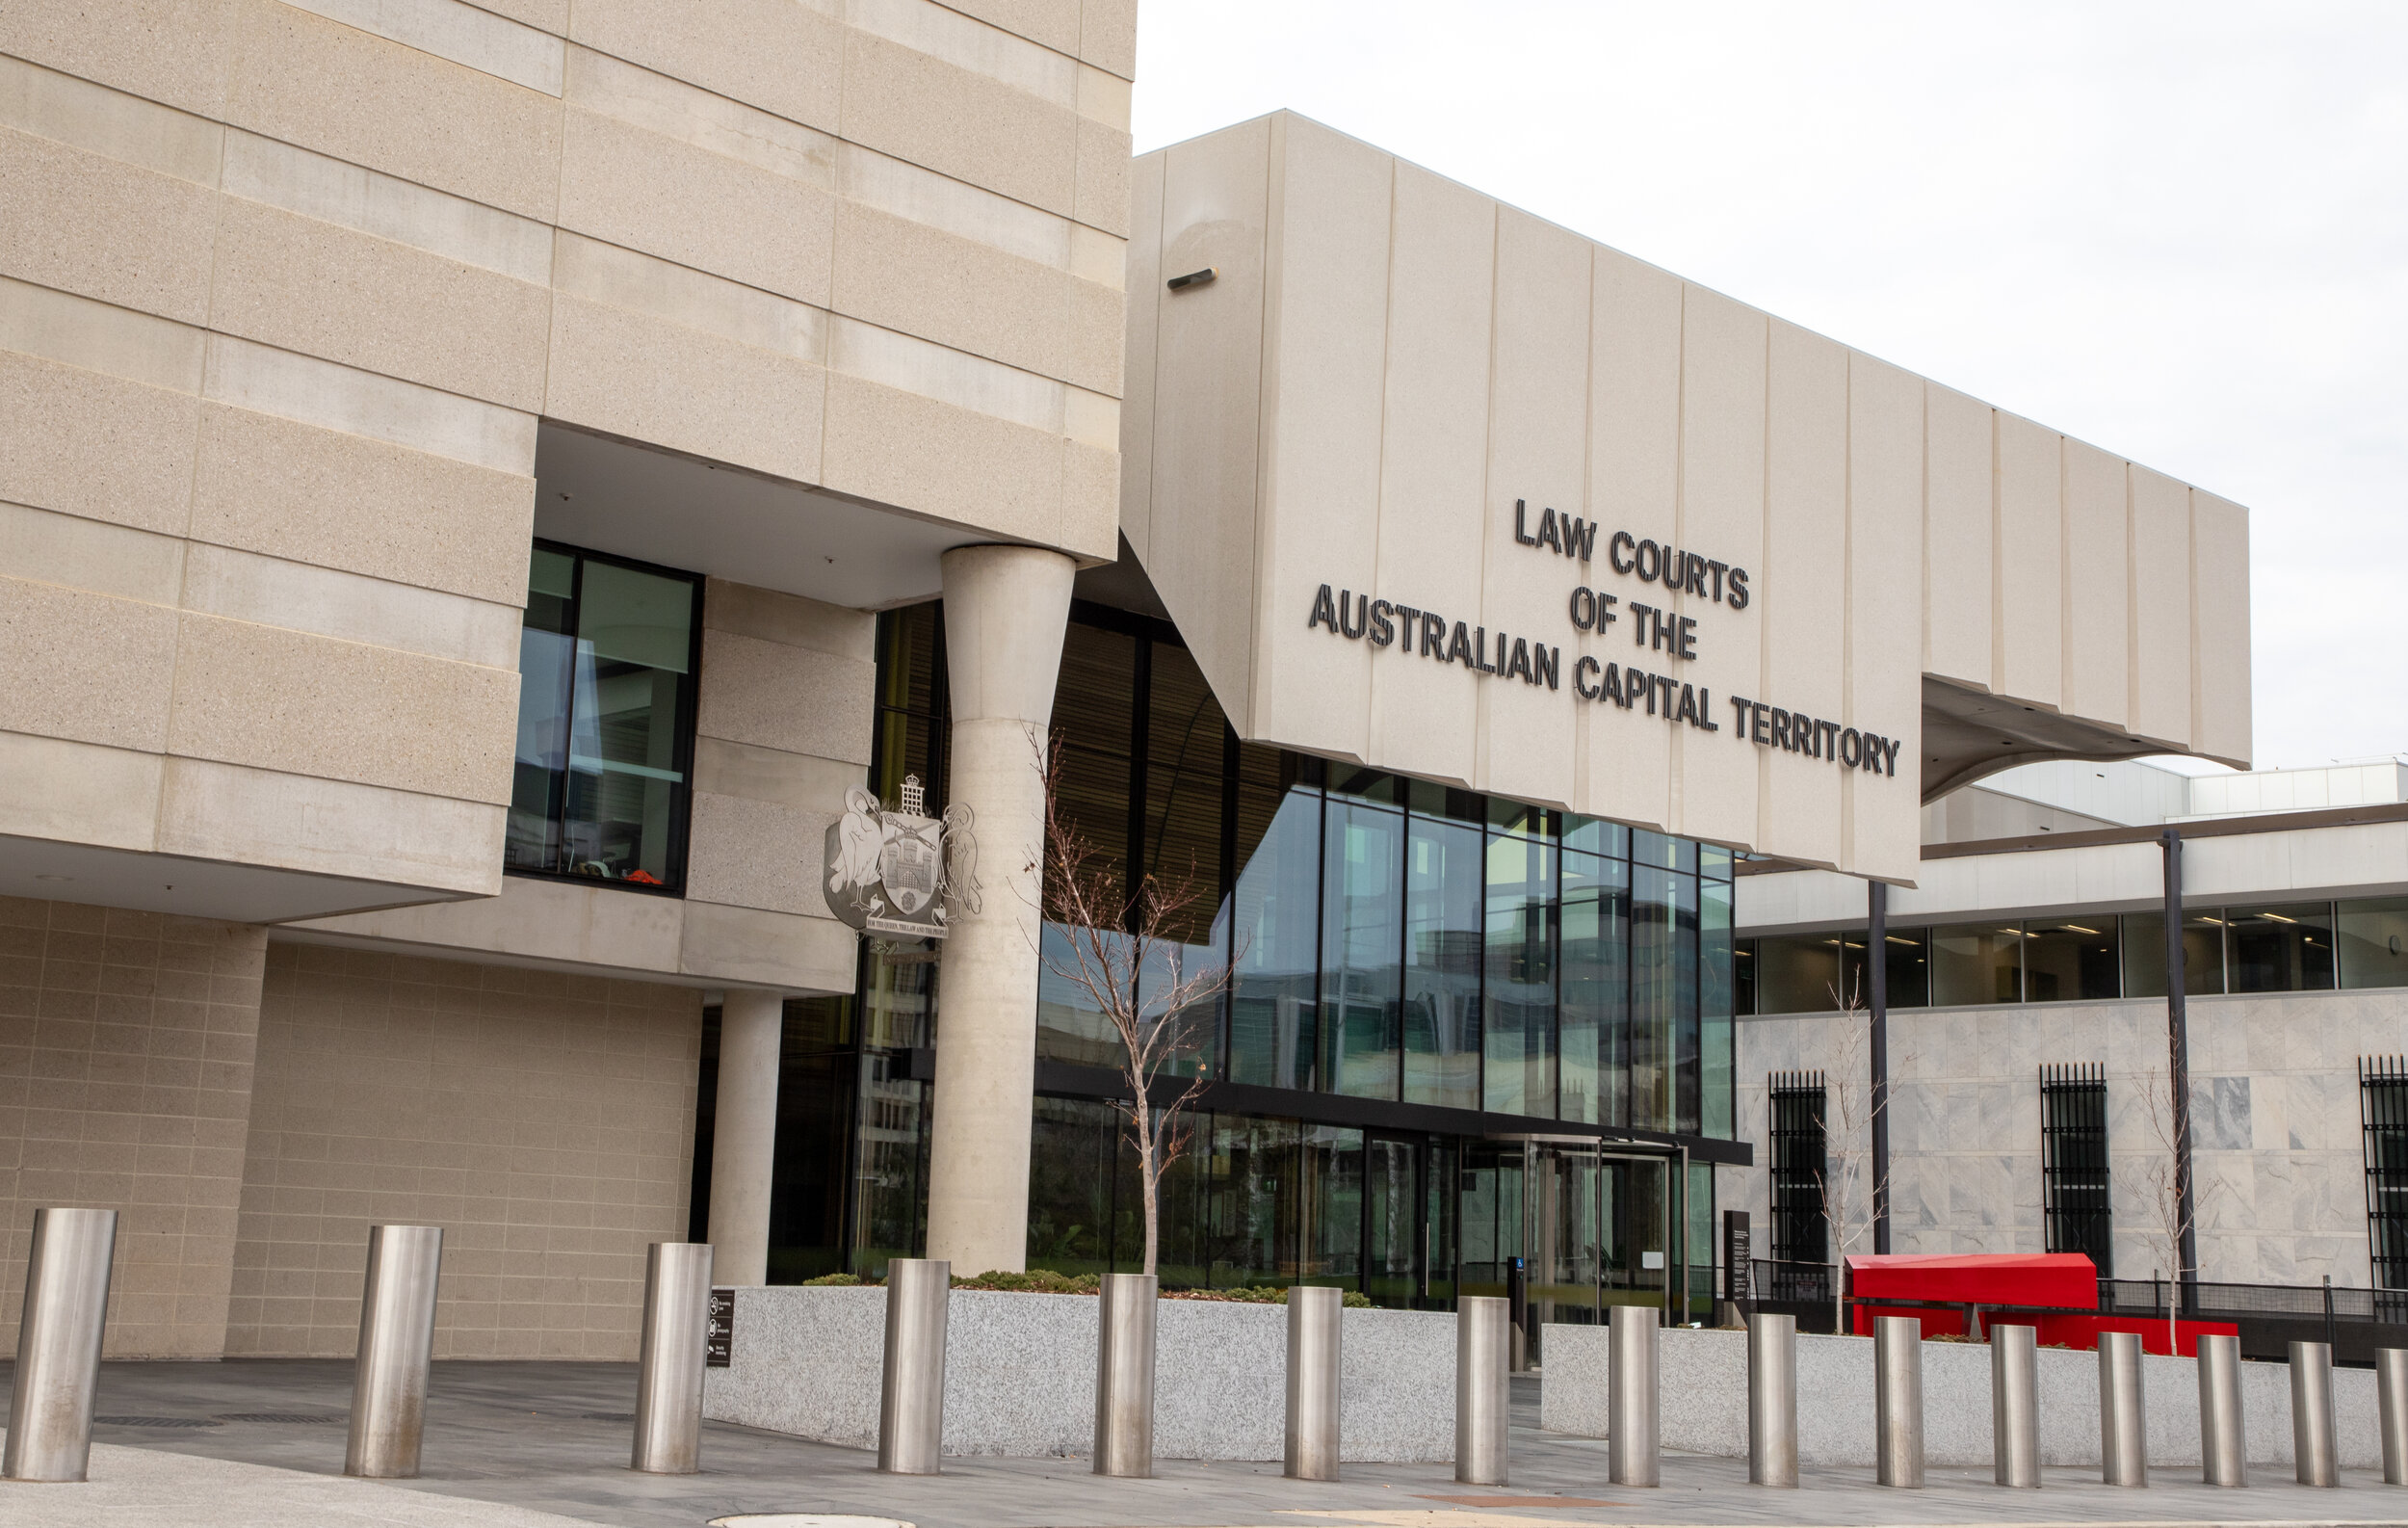 ACT LAW COURTS